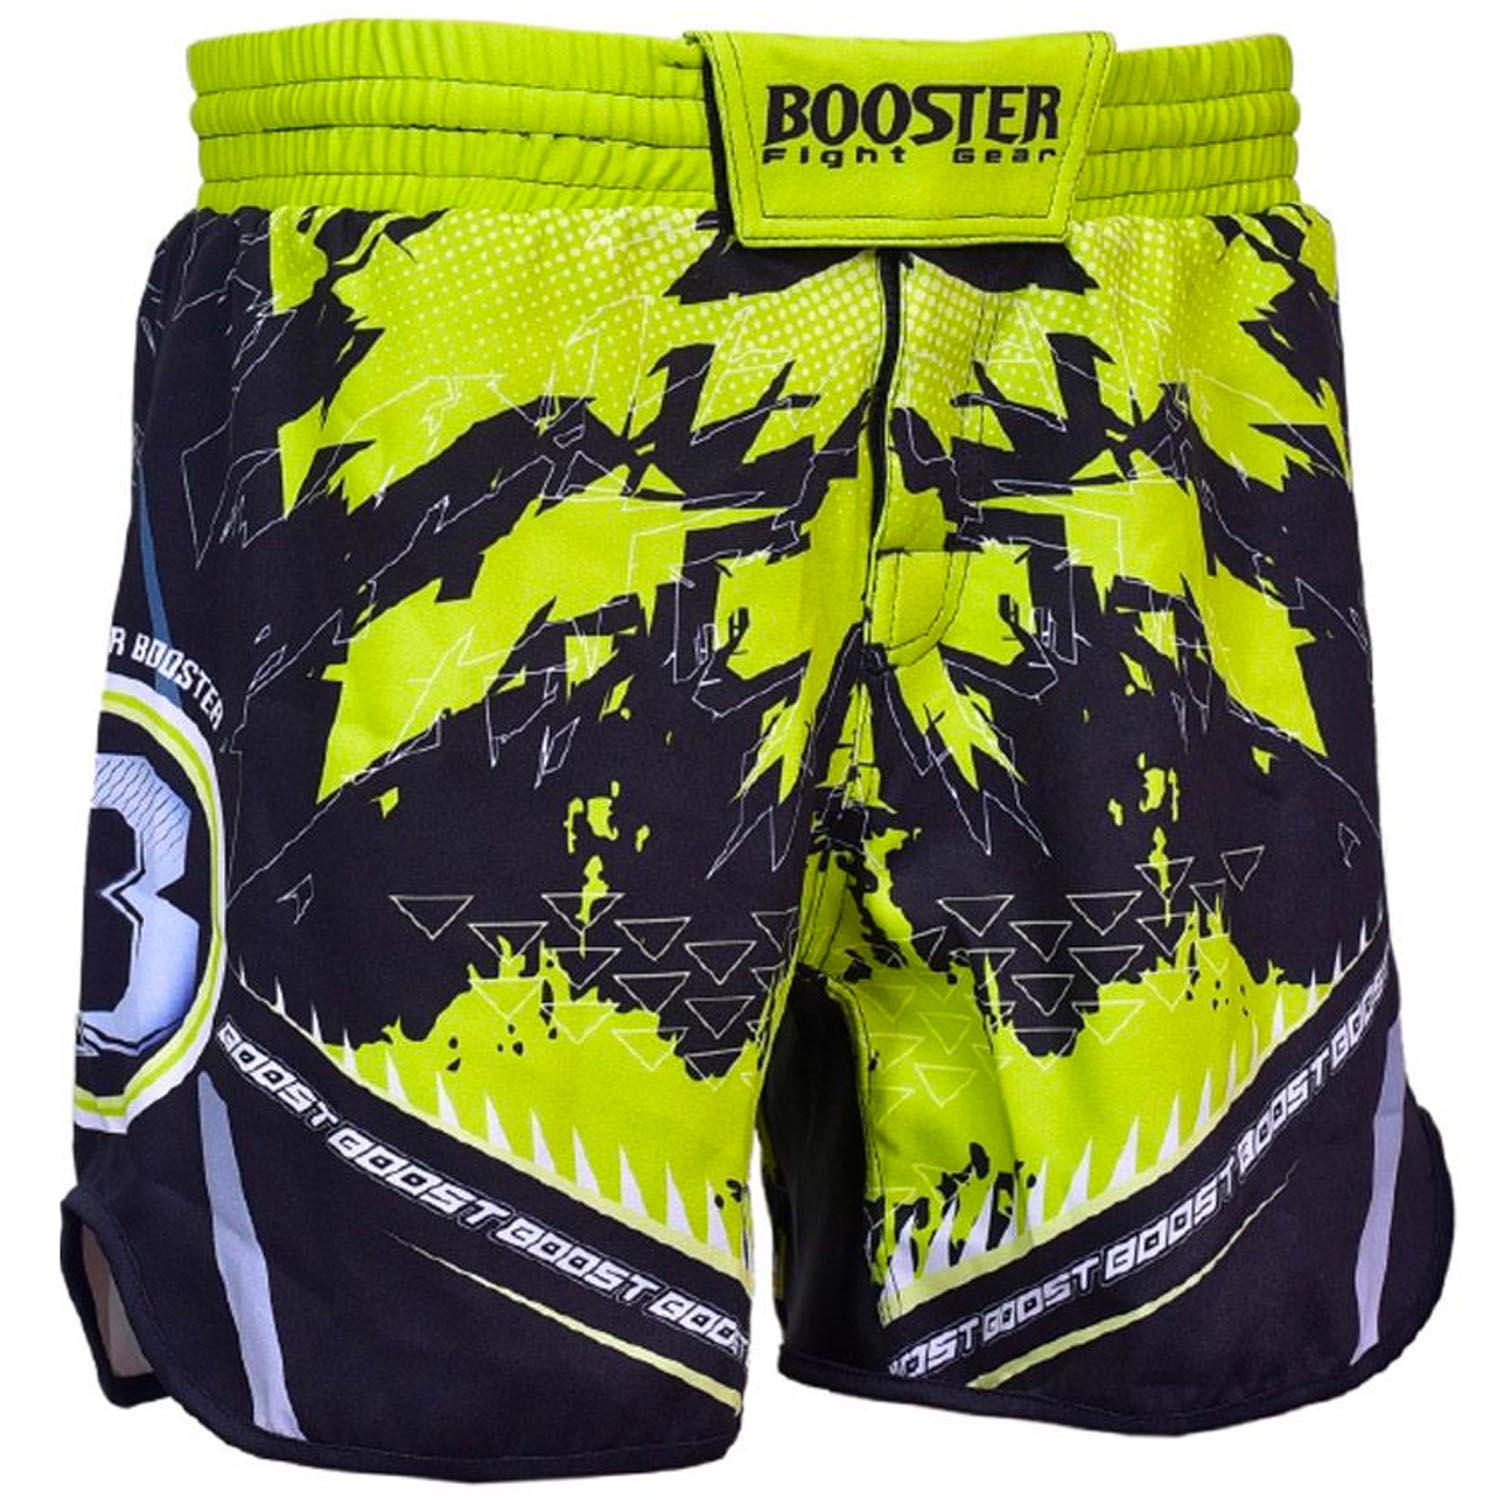 Booster MMA Fight Shorts, Chaos 2, black-yellow, L